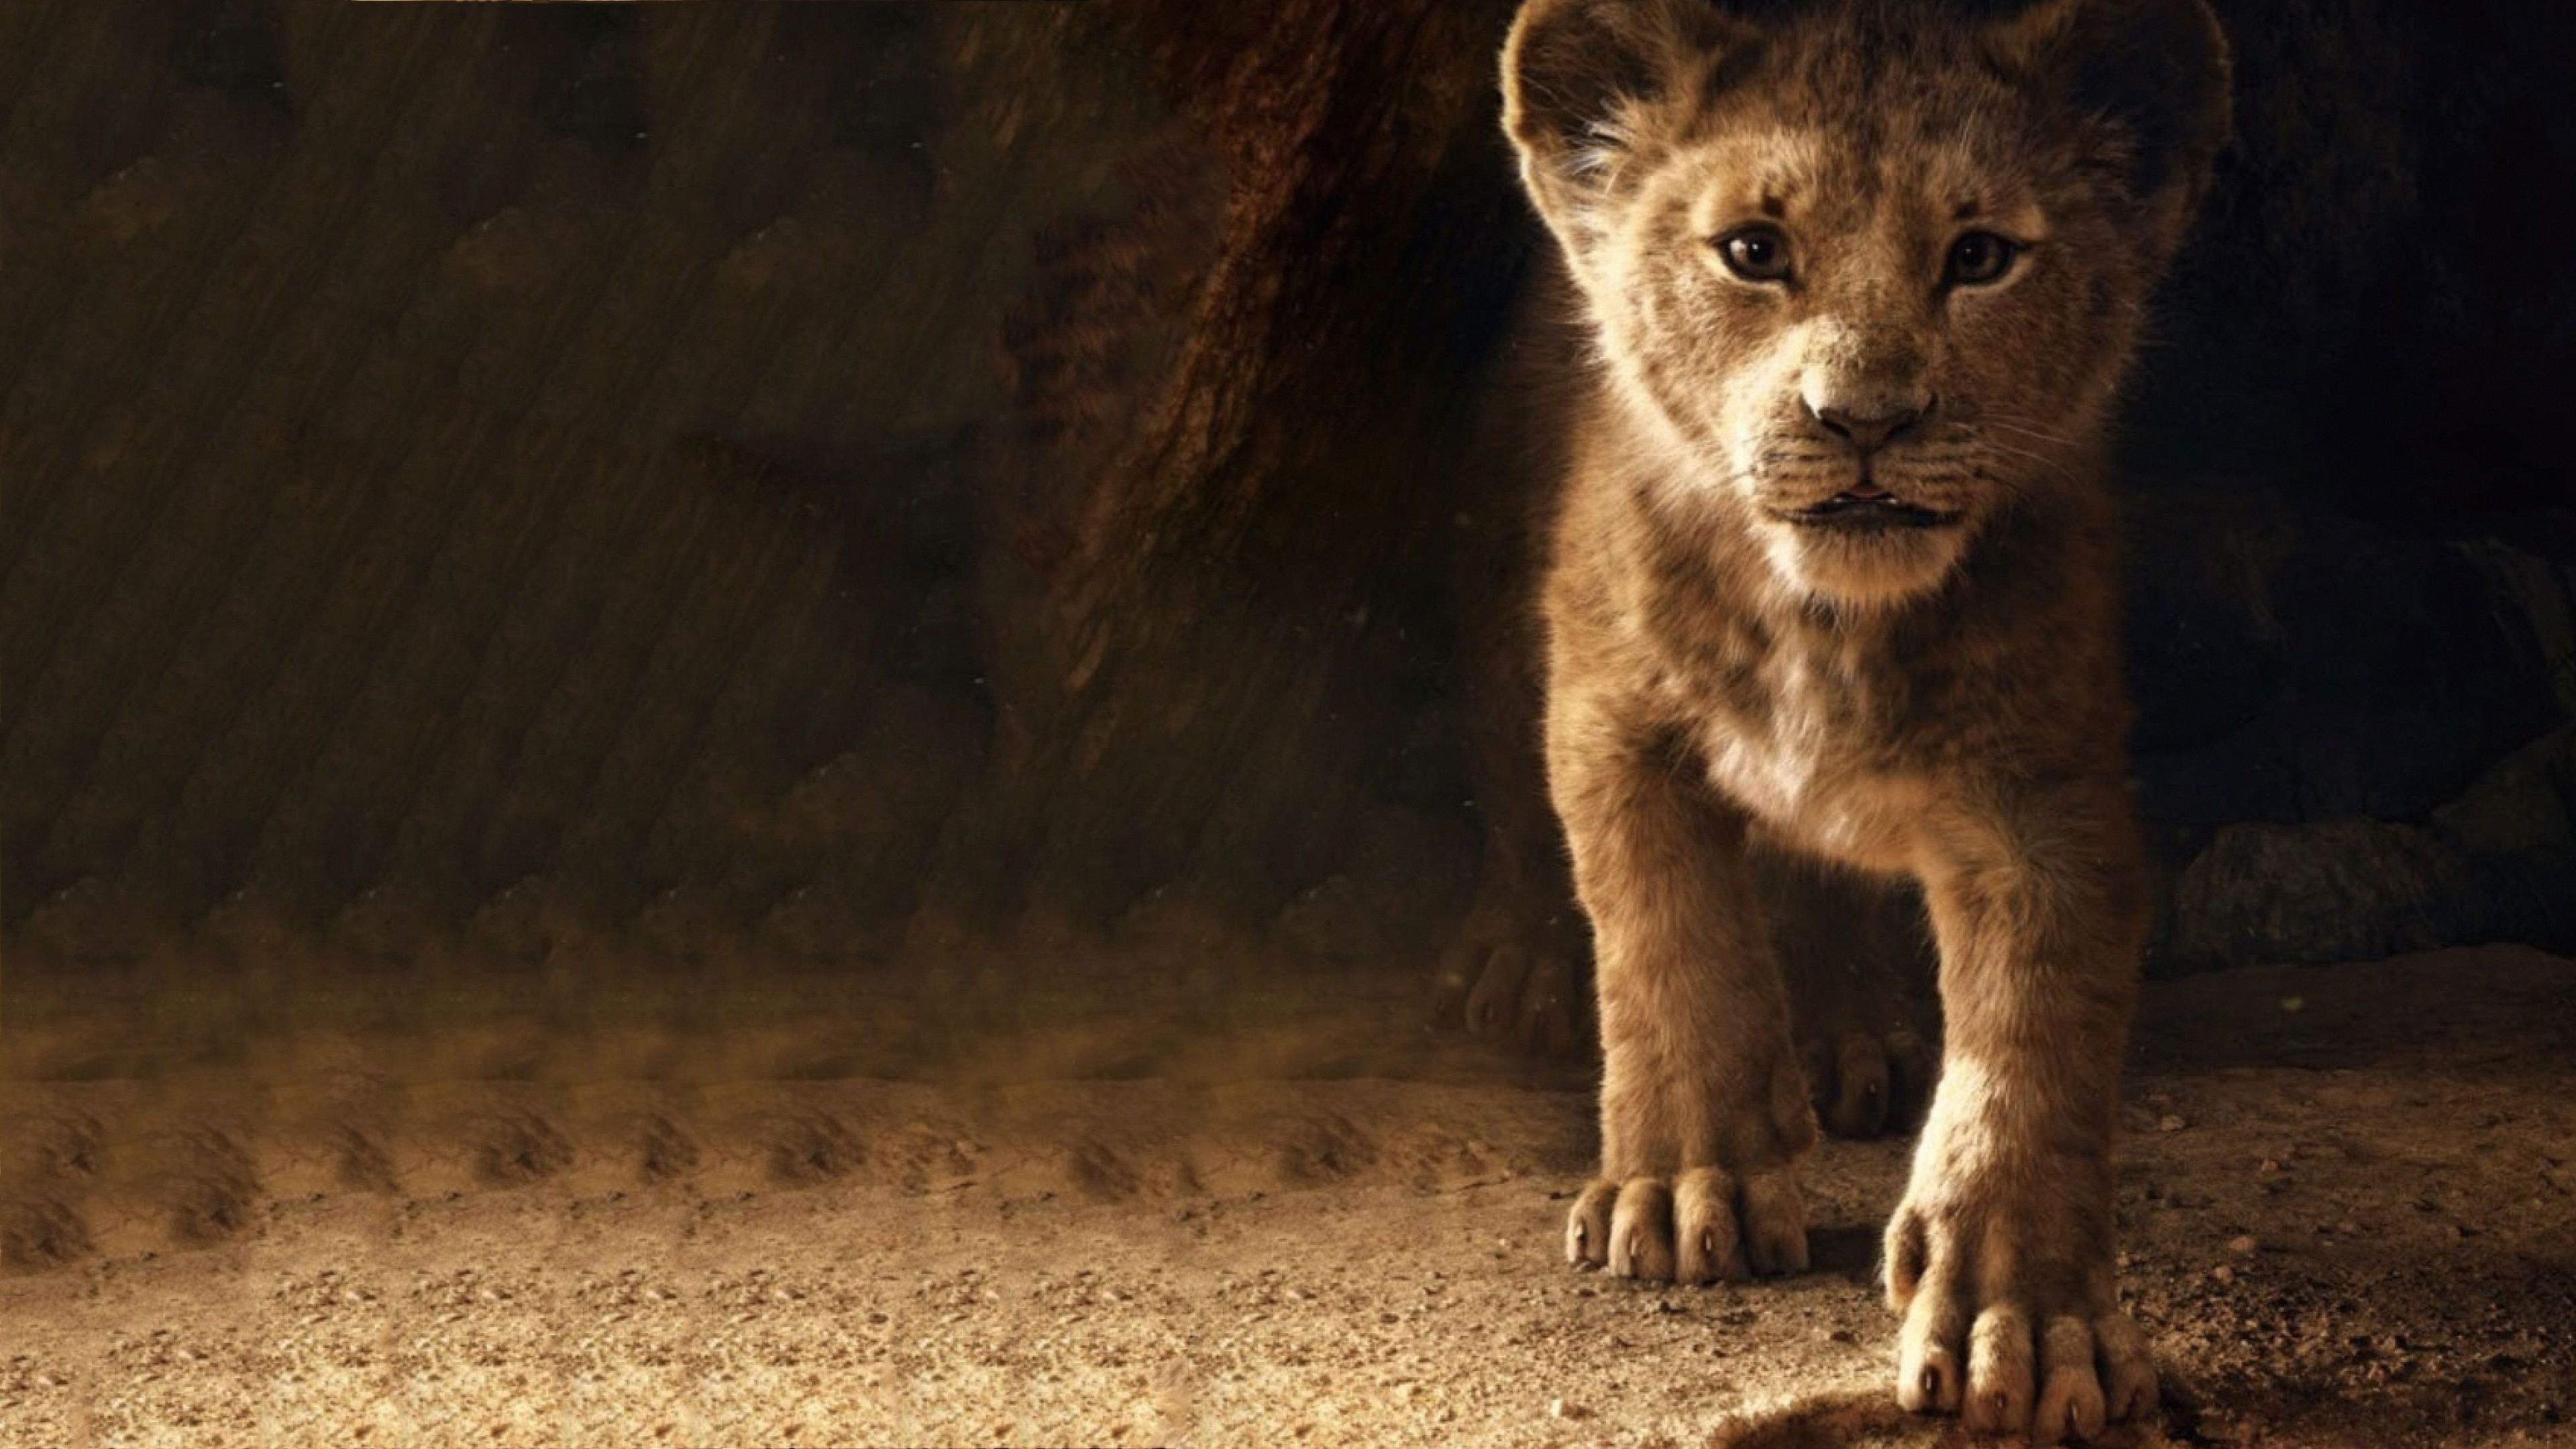 The Lion King movie, Majestic visuals, Iconic characters, Timeless story, 3840x2160 4K Desktop